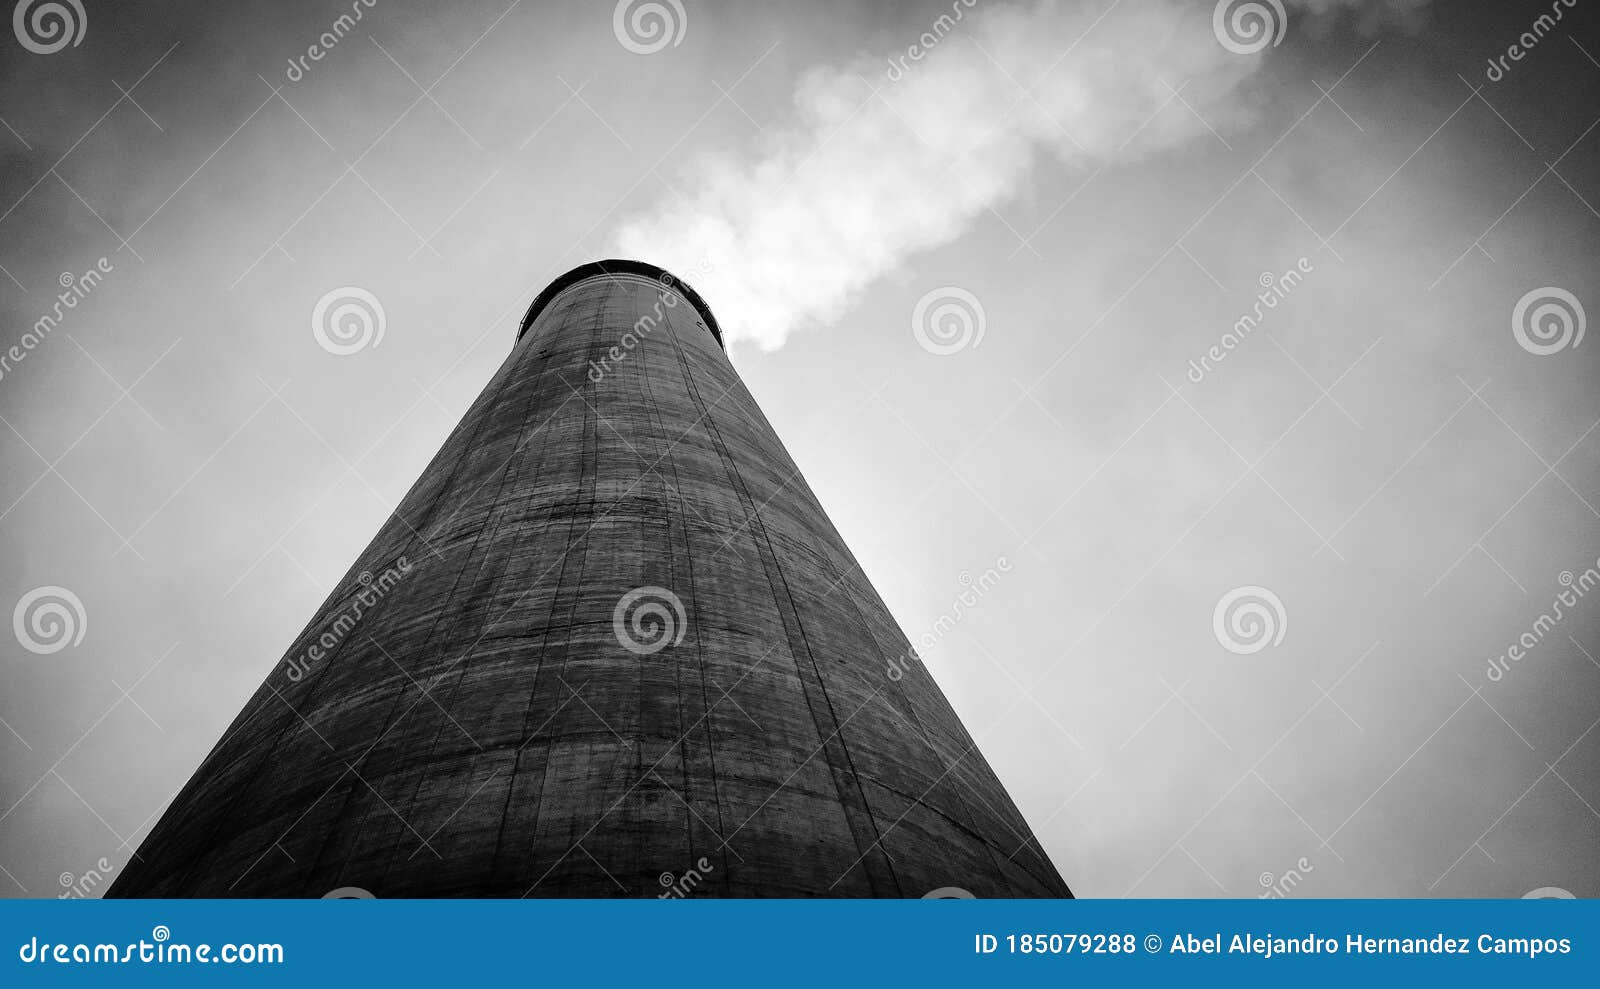 a big tower is the thermoelectric plant chimneys